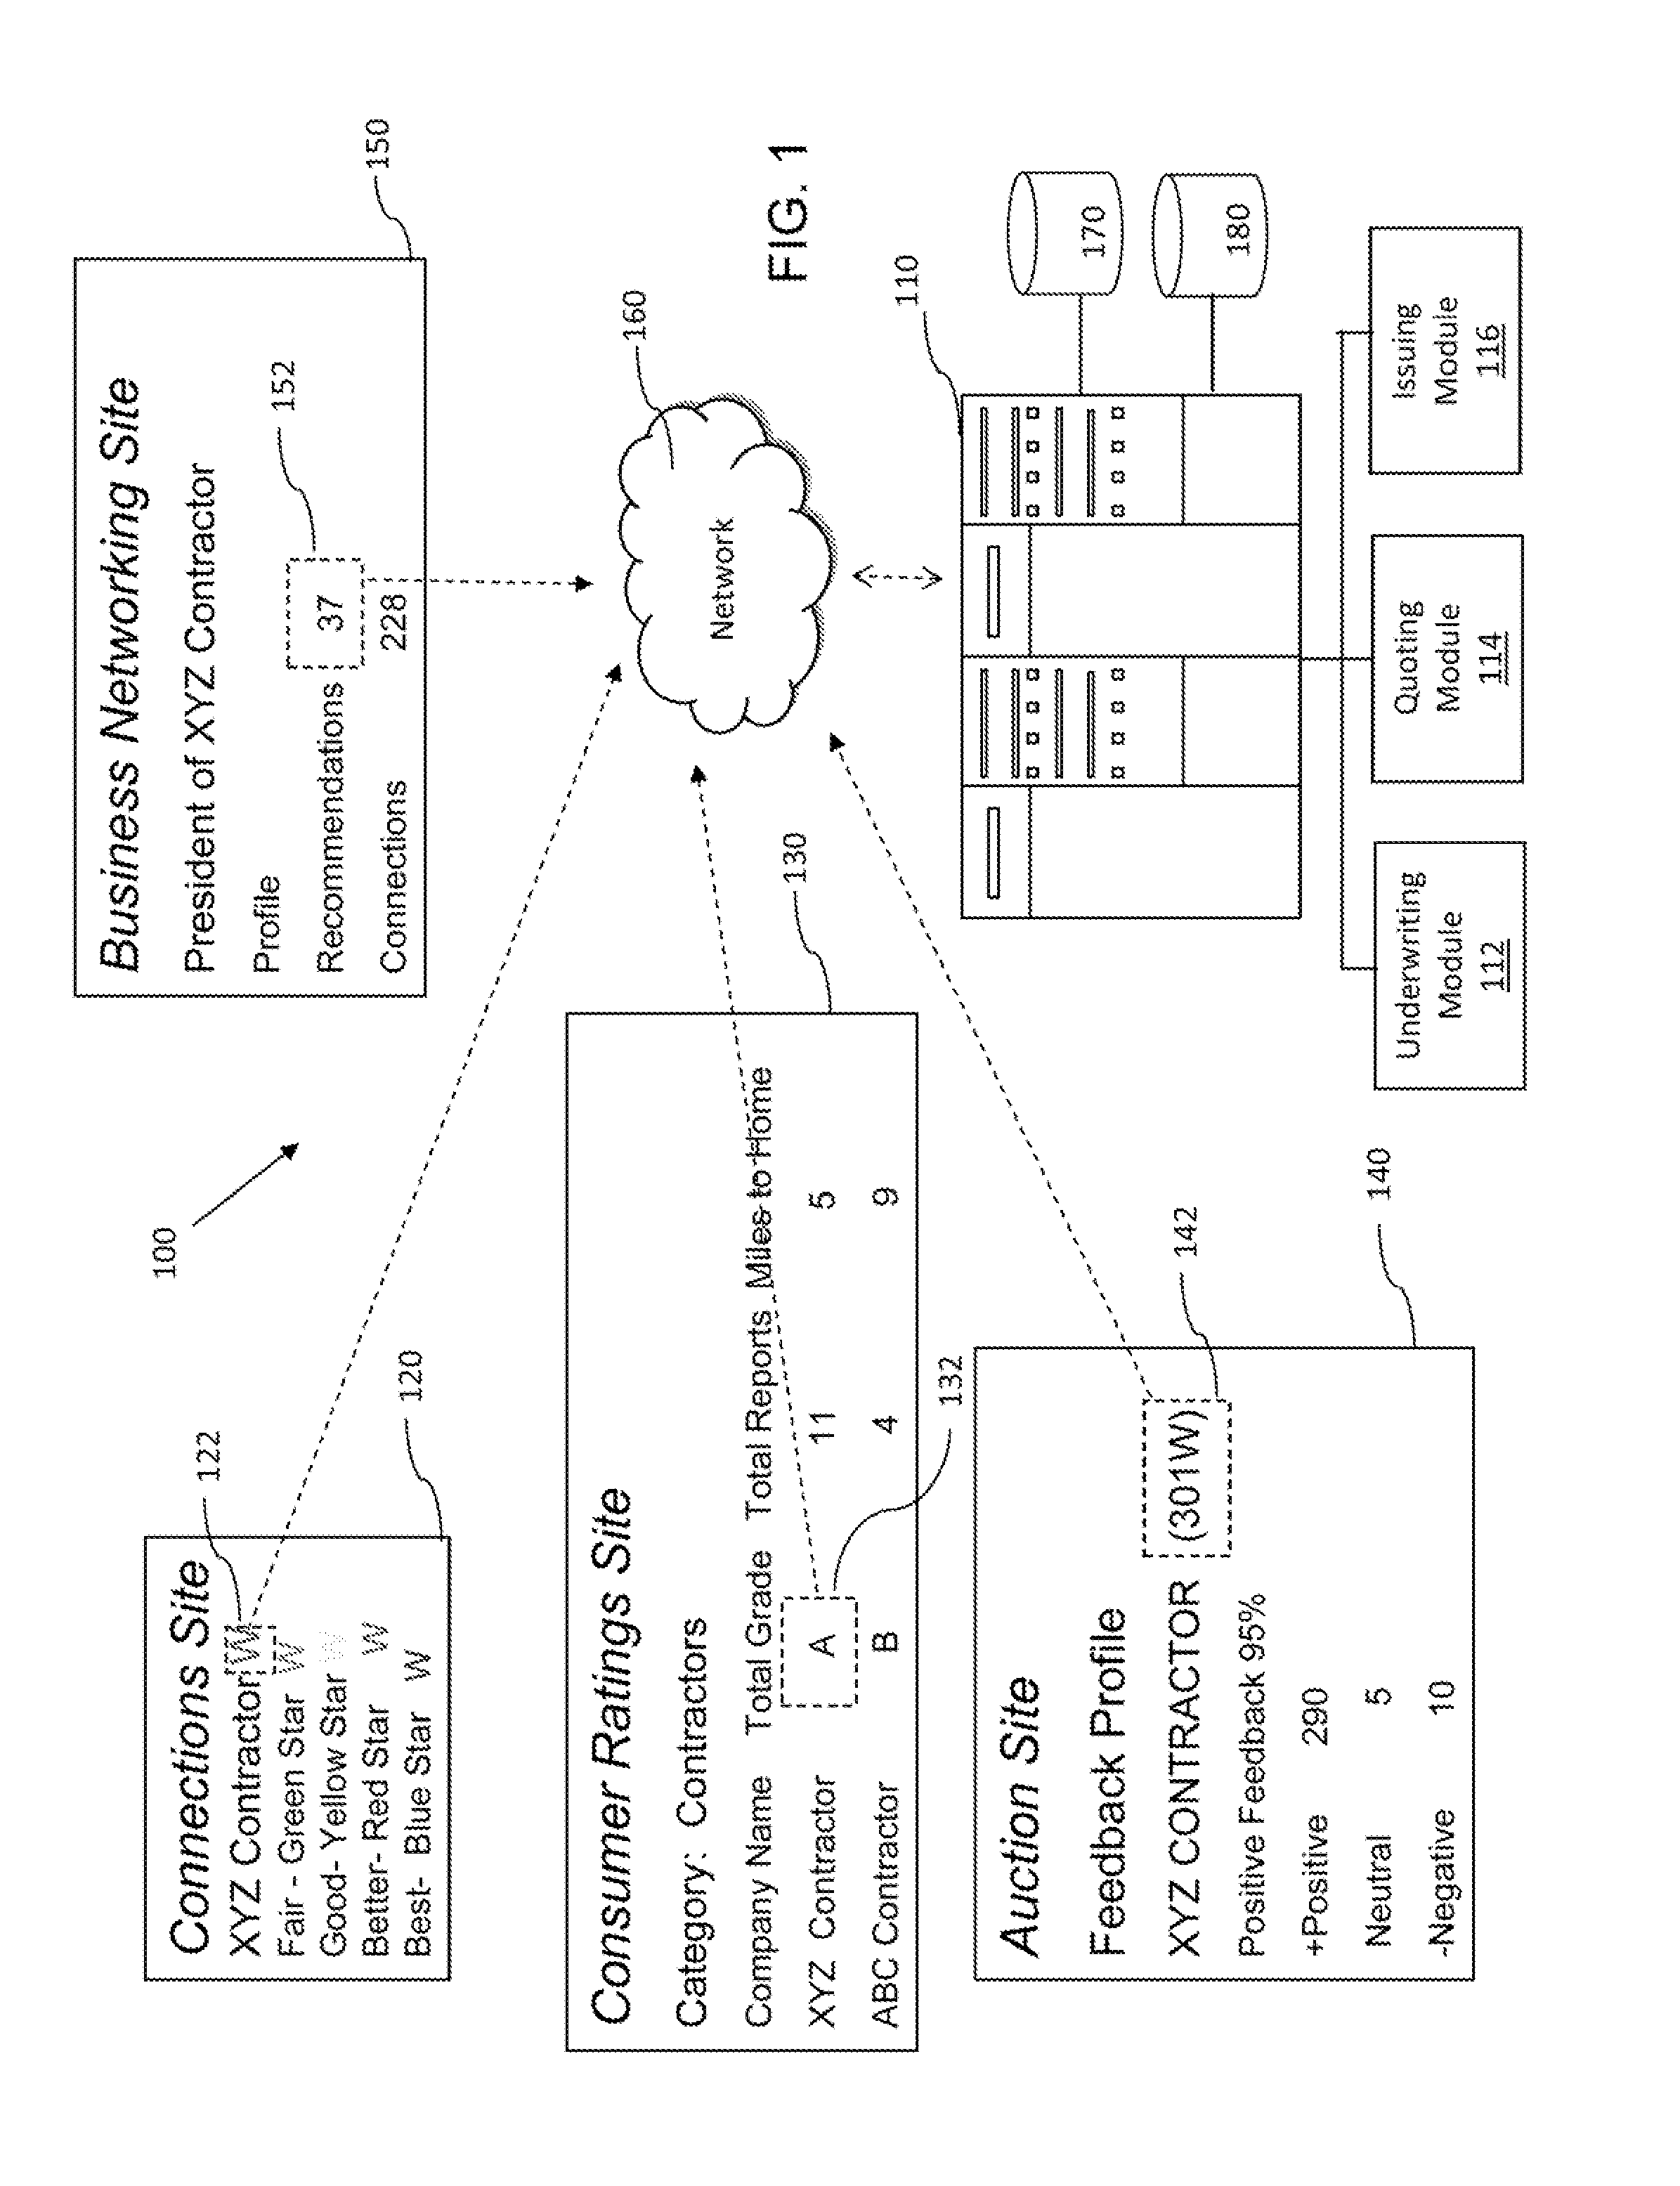 Systems and methods for intelligent underwriting based on community or social network data